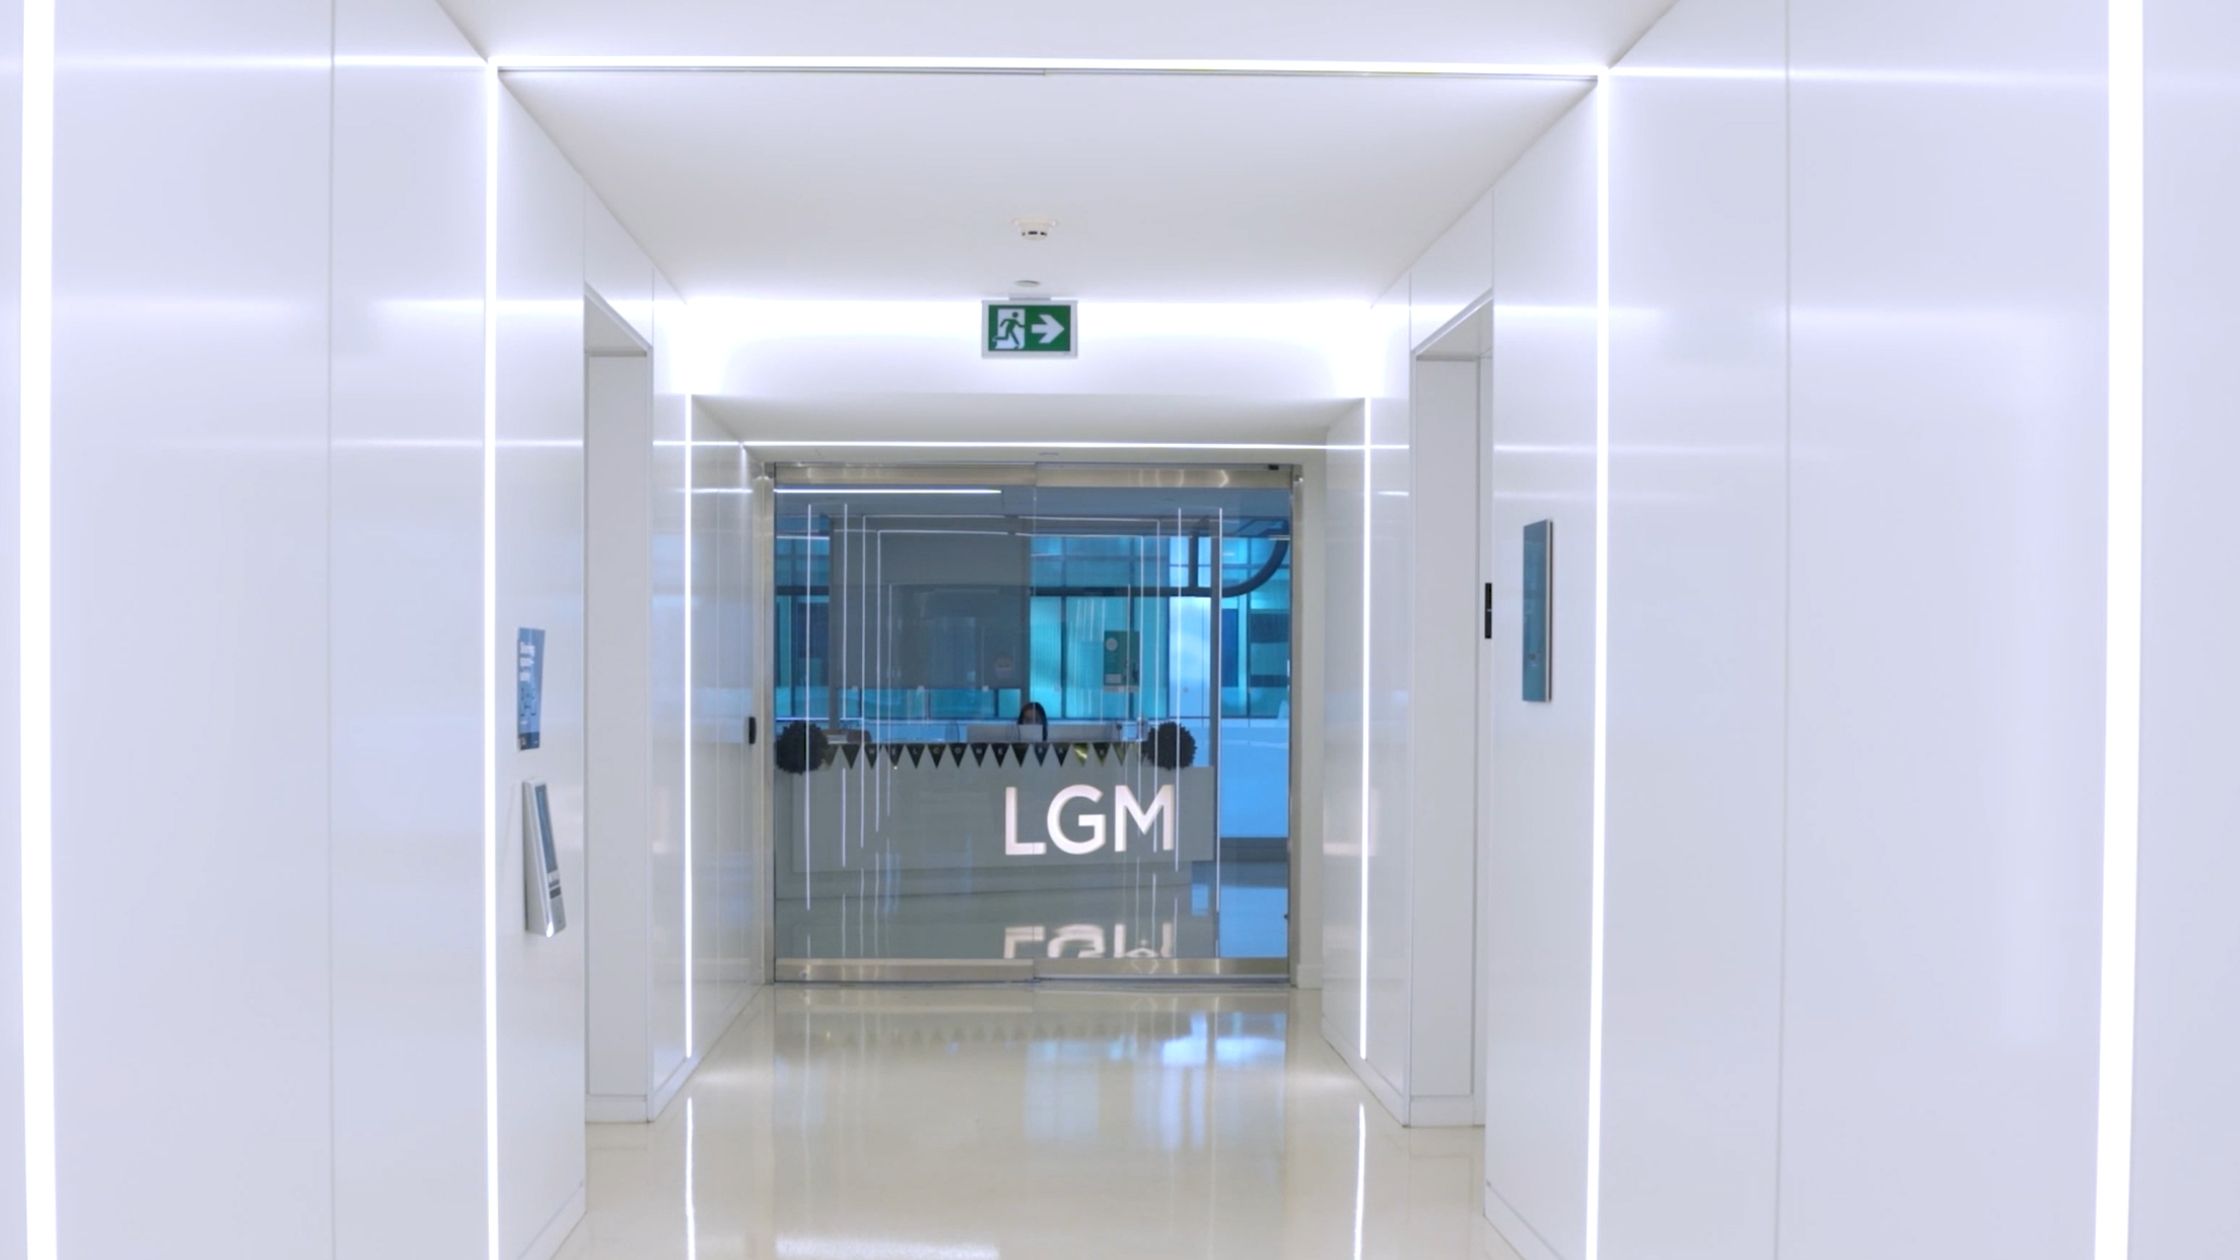 LGM uses Pivvot to re-imagine how their team uses the workplace